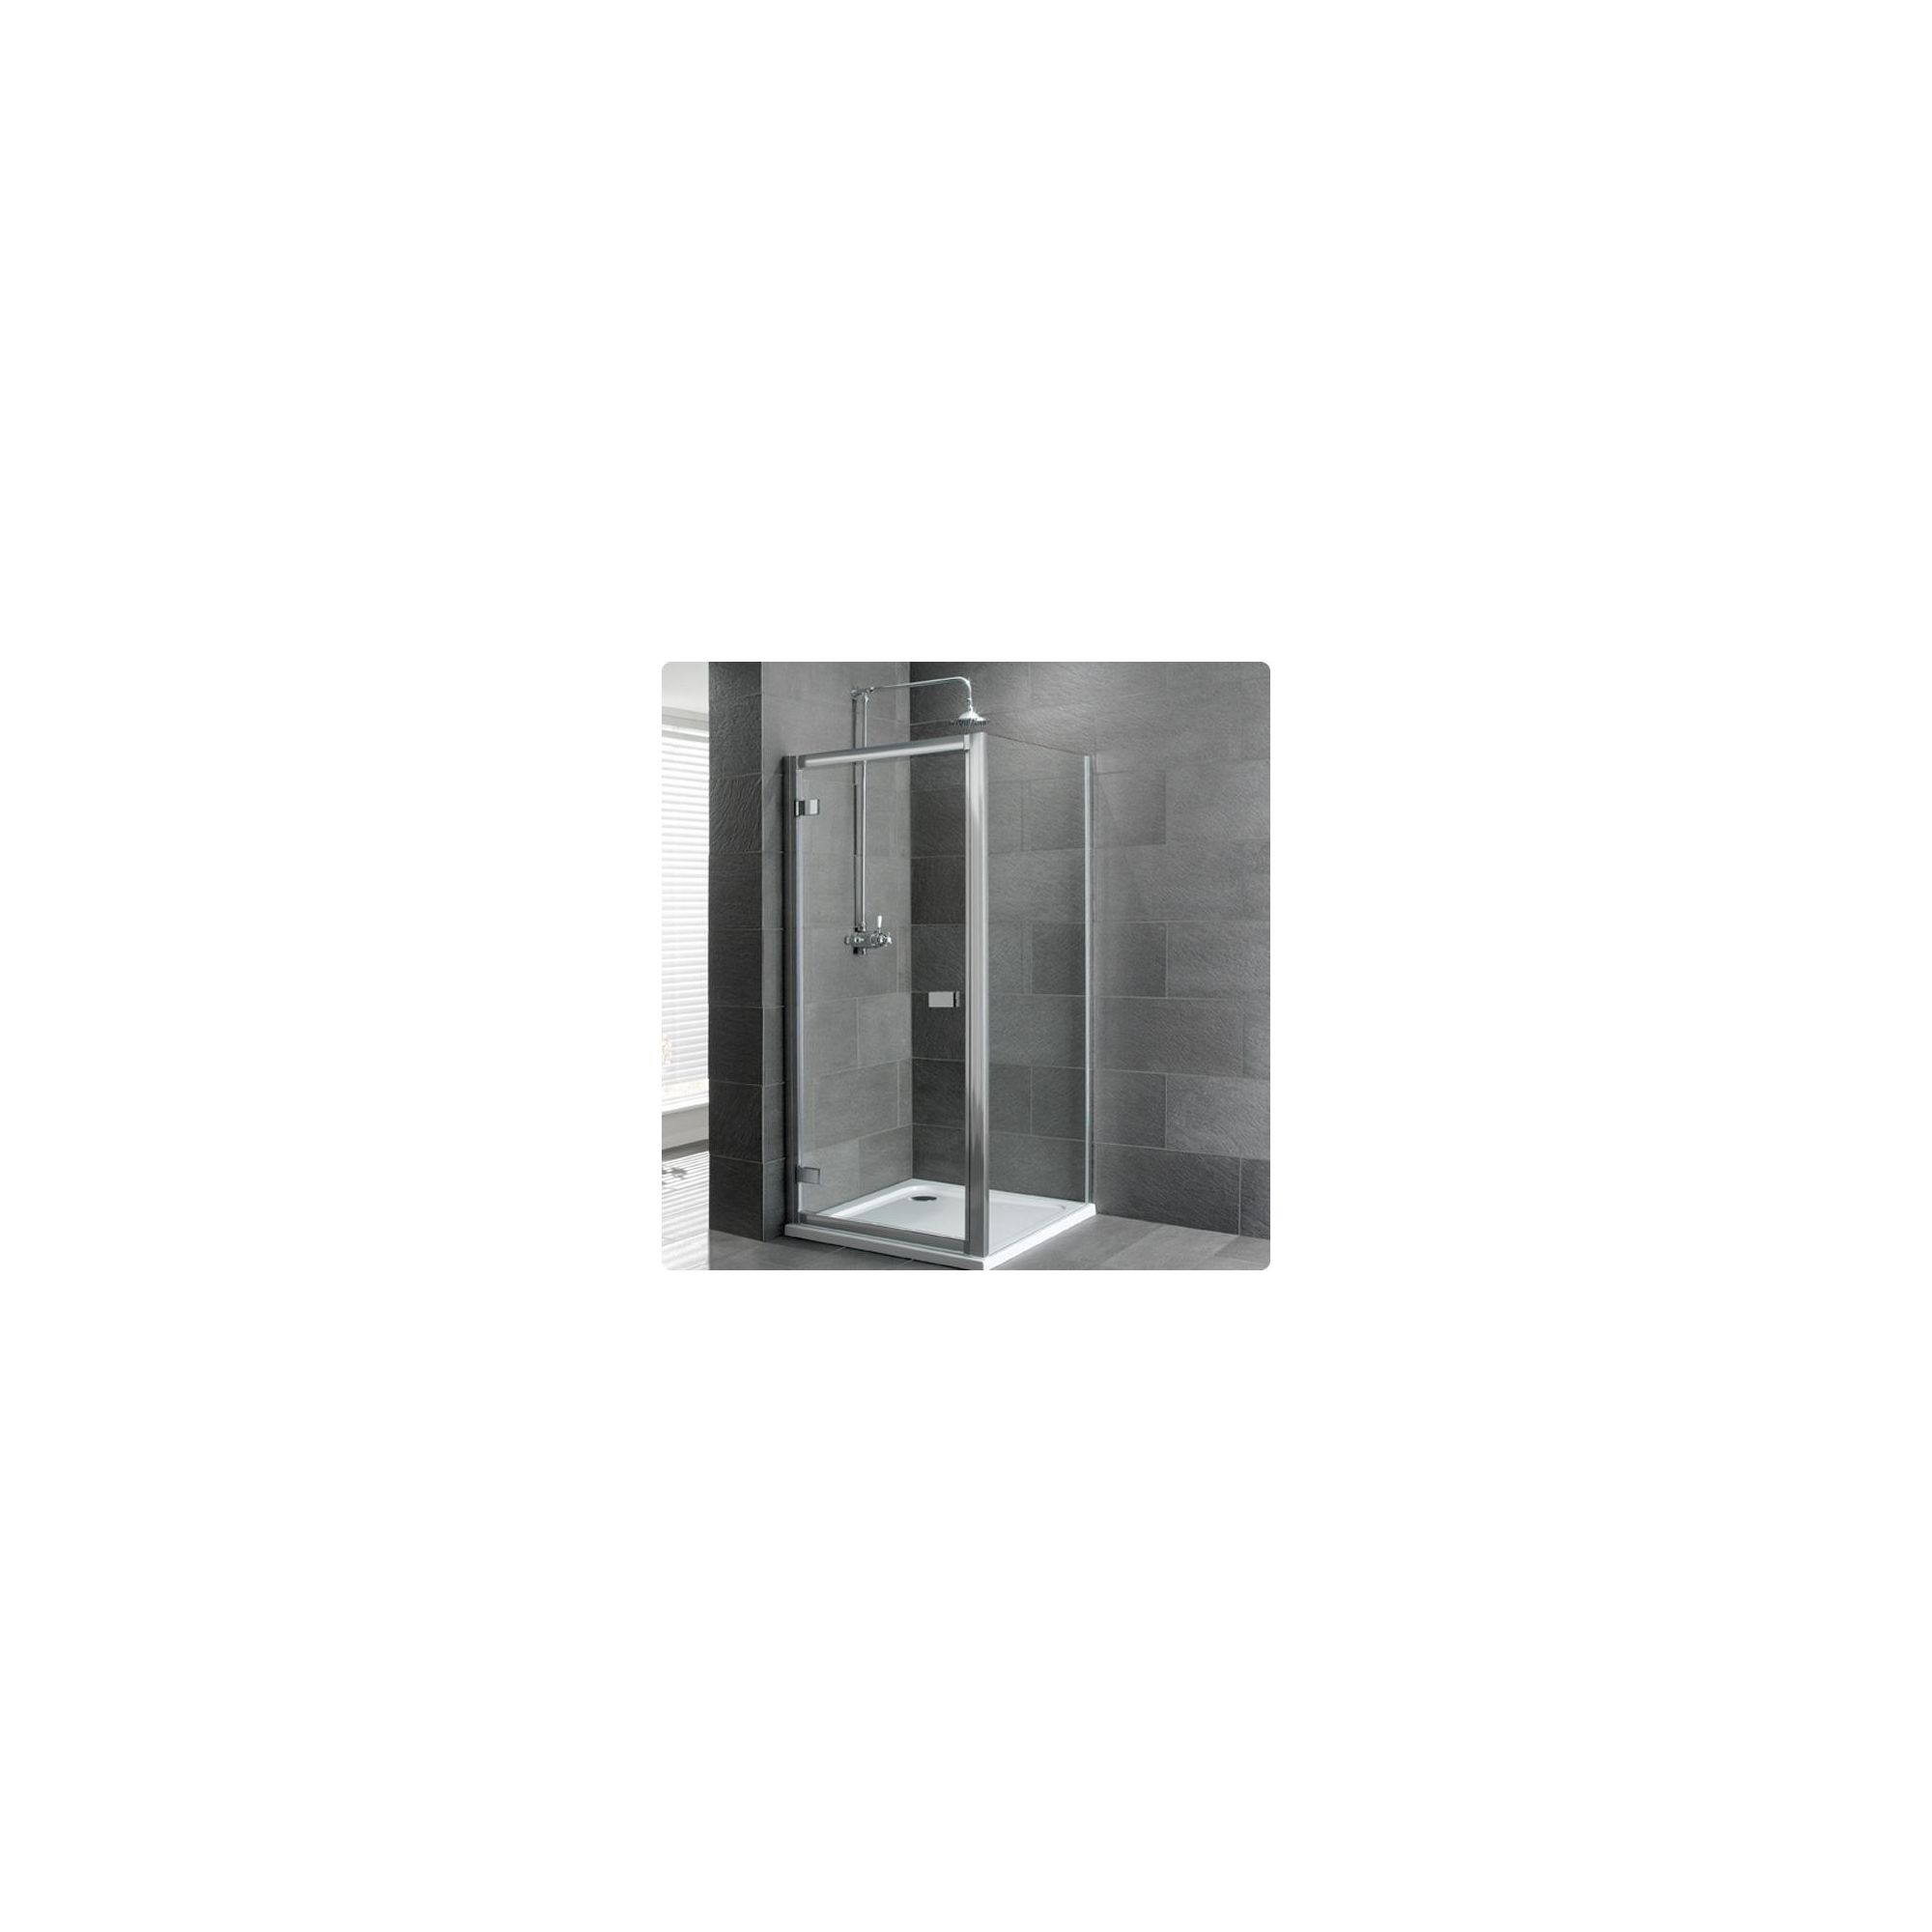 Duchy Select Silver Hinged Door Shower Enclosure, 1000mm x 1000mm, Standard Tray, 6mm Glass at Tesco Direct